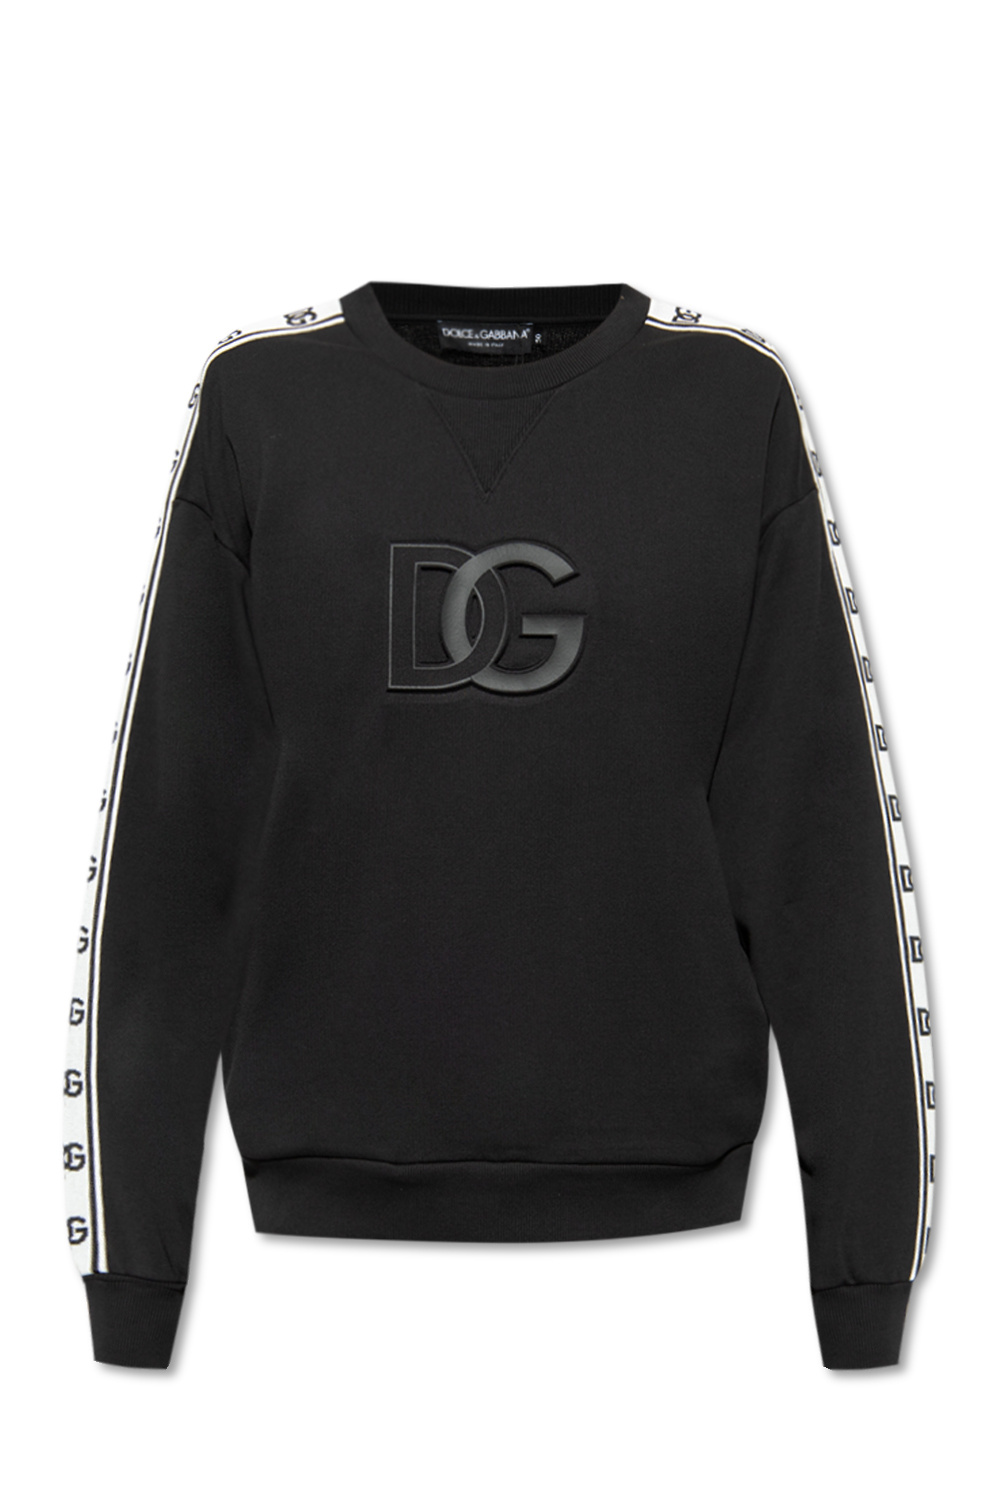 Jersey Turtle-Neck Bodysuit With Dg Logo by Dolce & Gabbana at